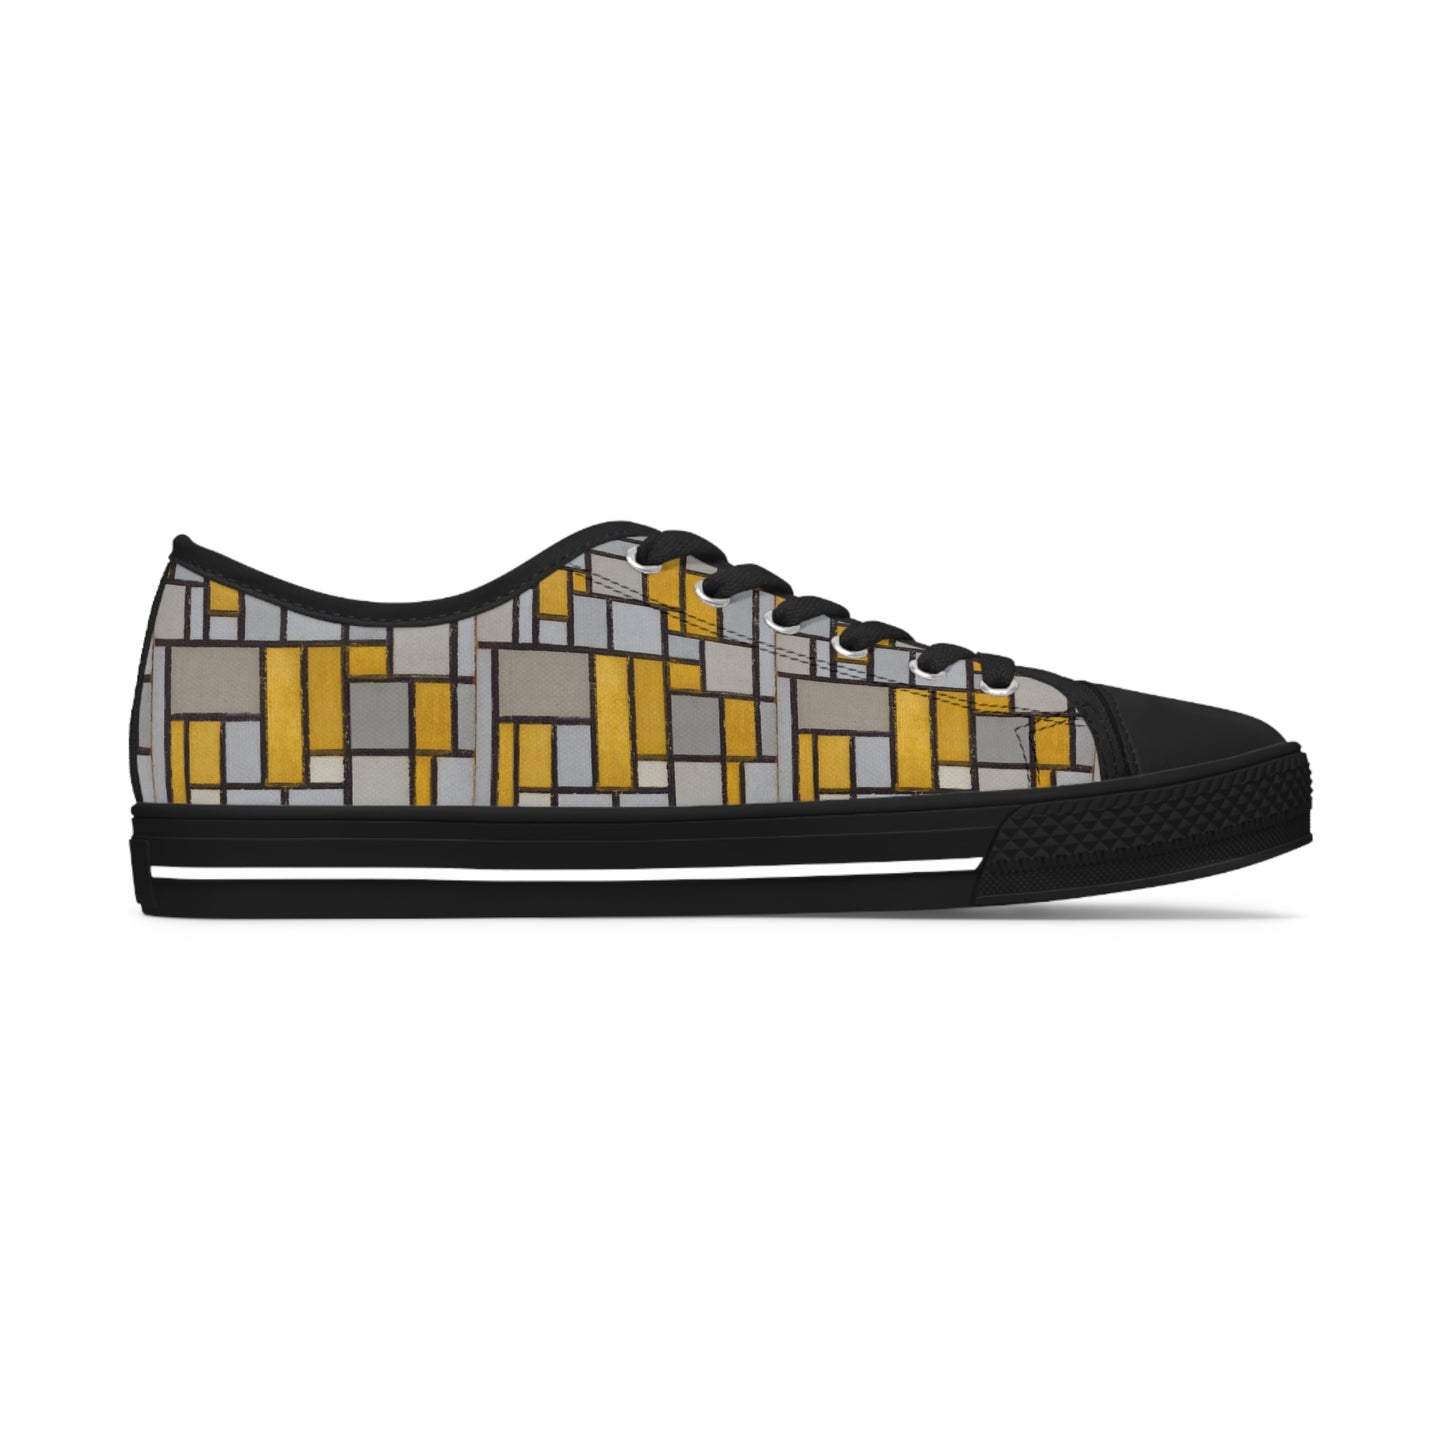 PIET MONDRIAN - COMPOSITION WITH GRID No. 1 - LOW TOP ART SNEAKERS FOR HER